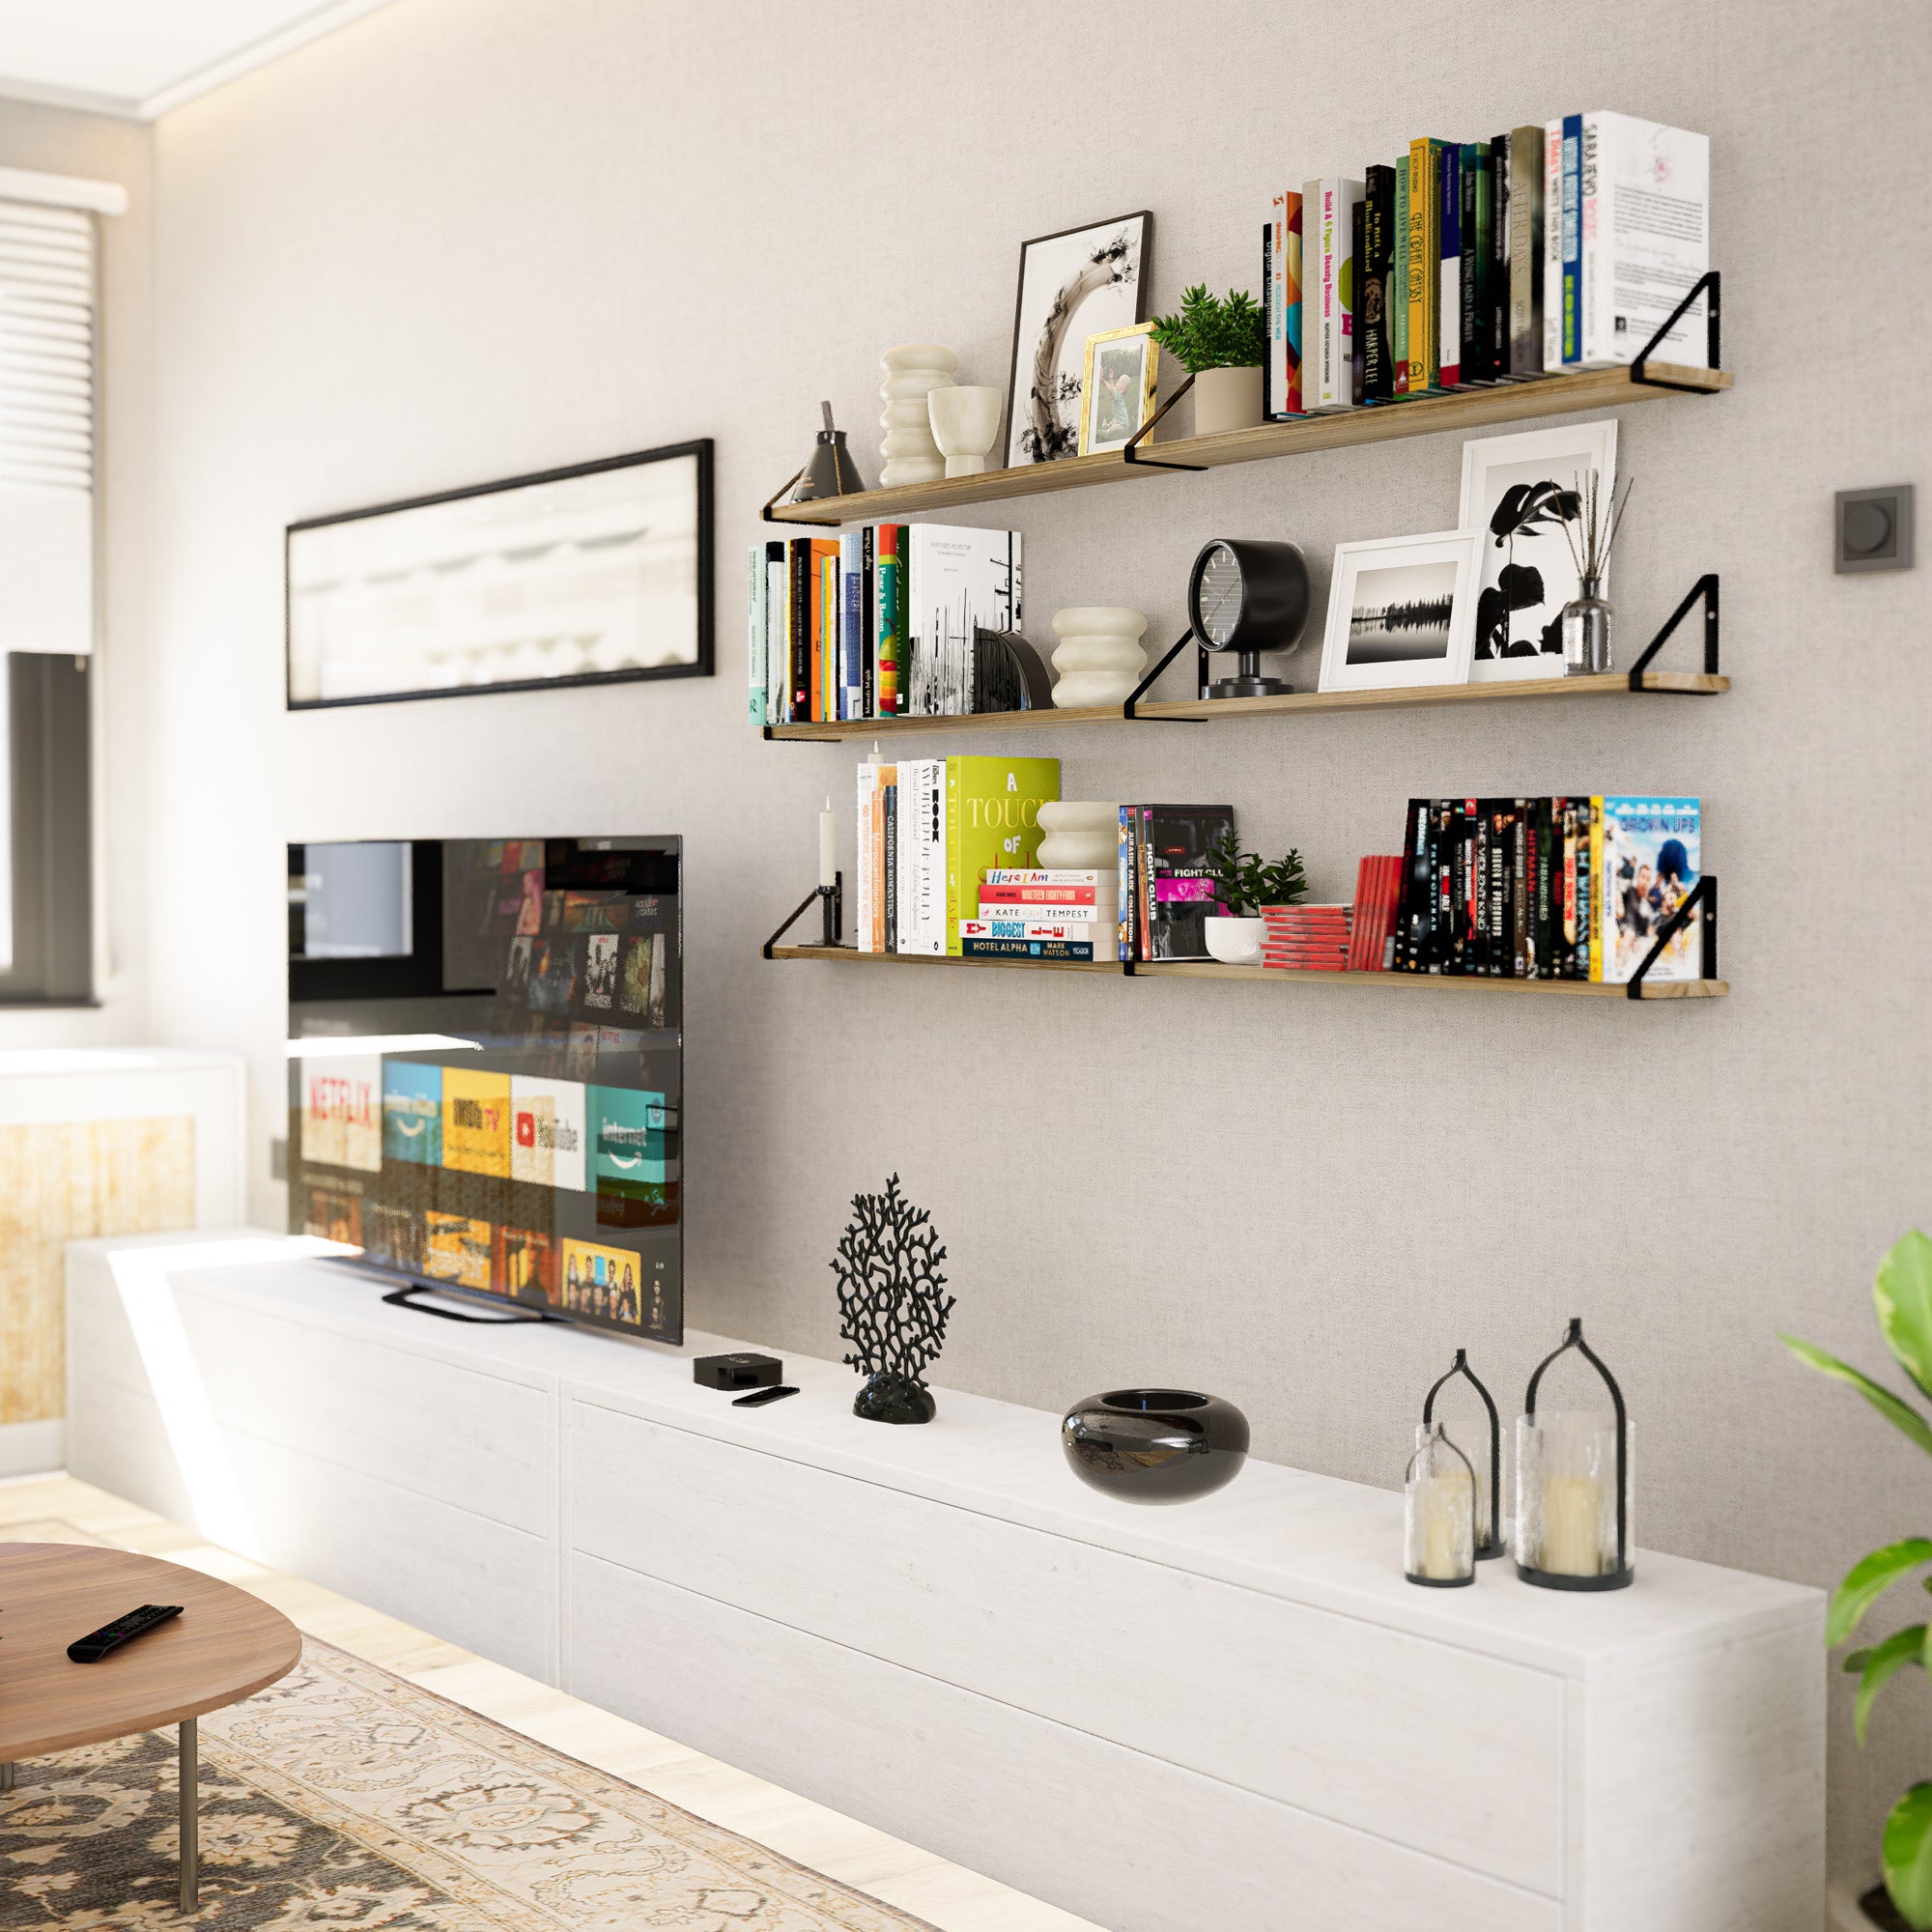 Modern living room setup with wall mount shelves displaying a variety of books, framed pictures, and decorative items.